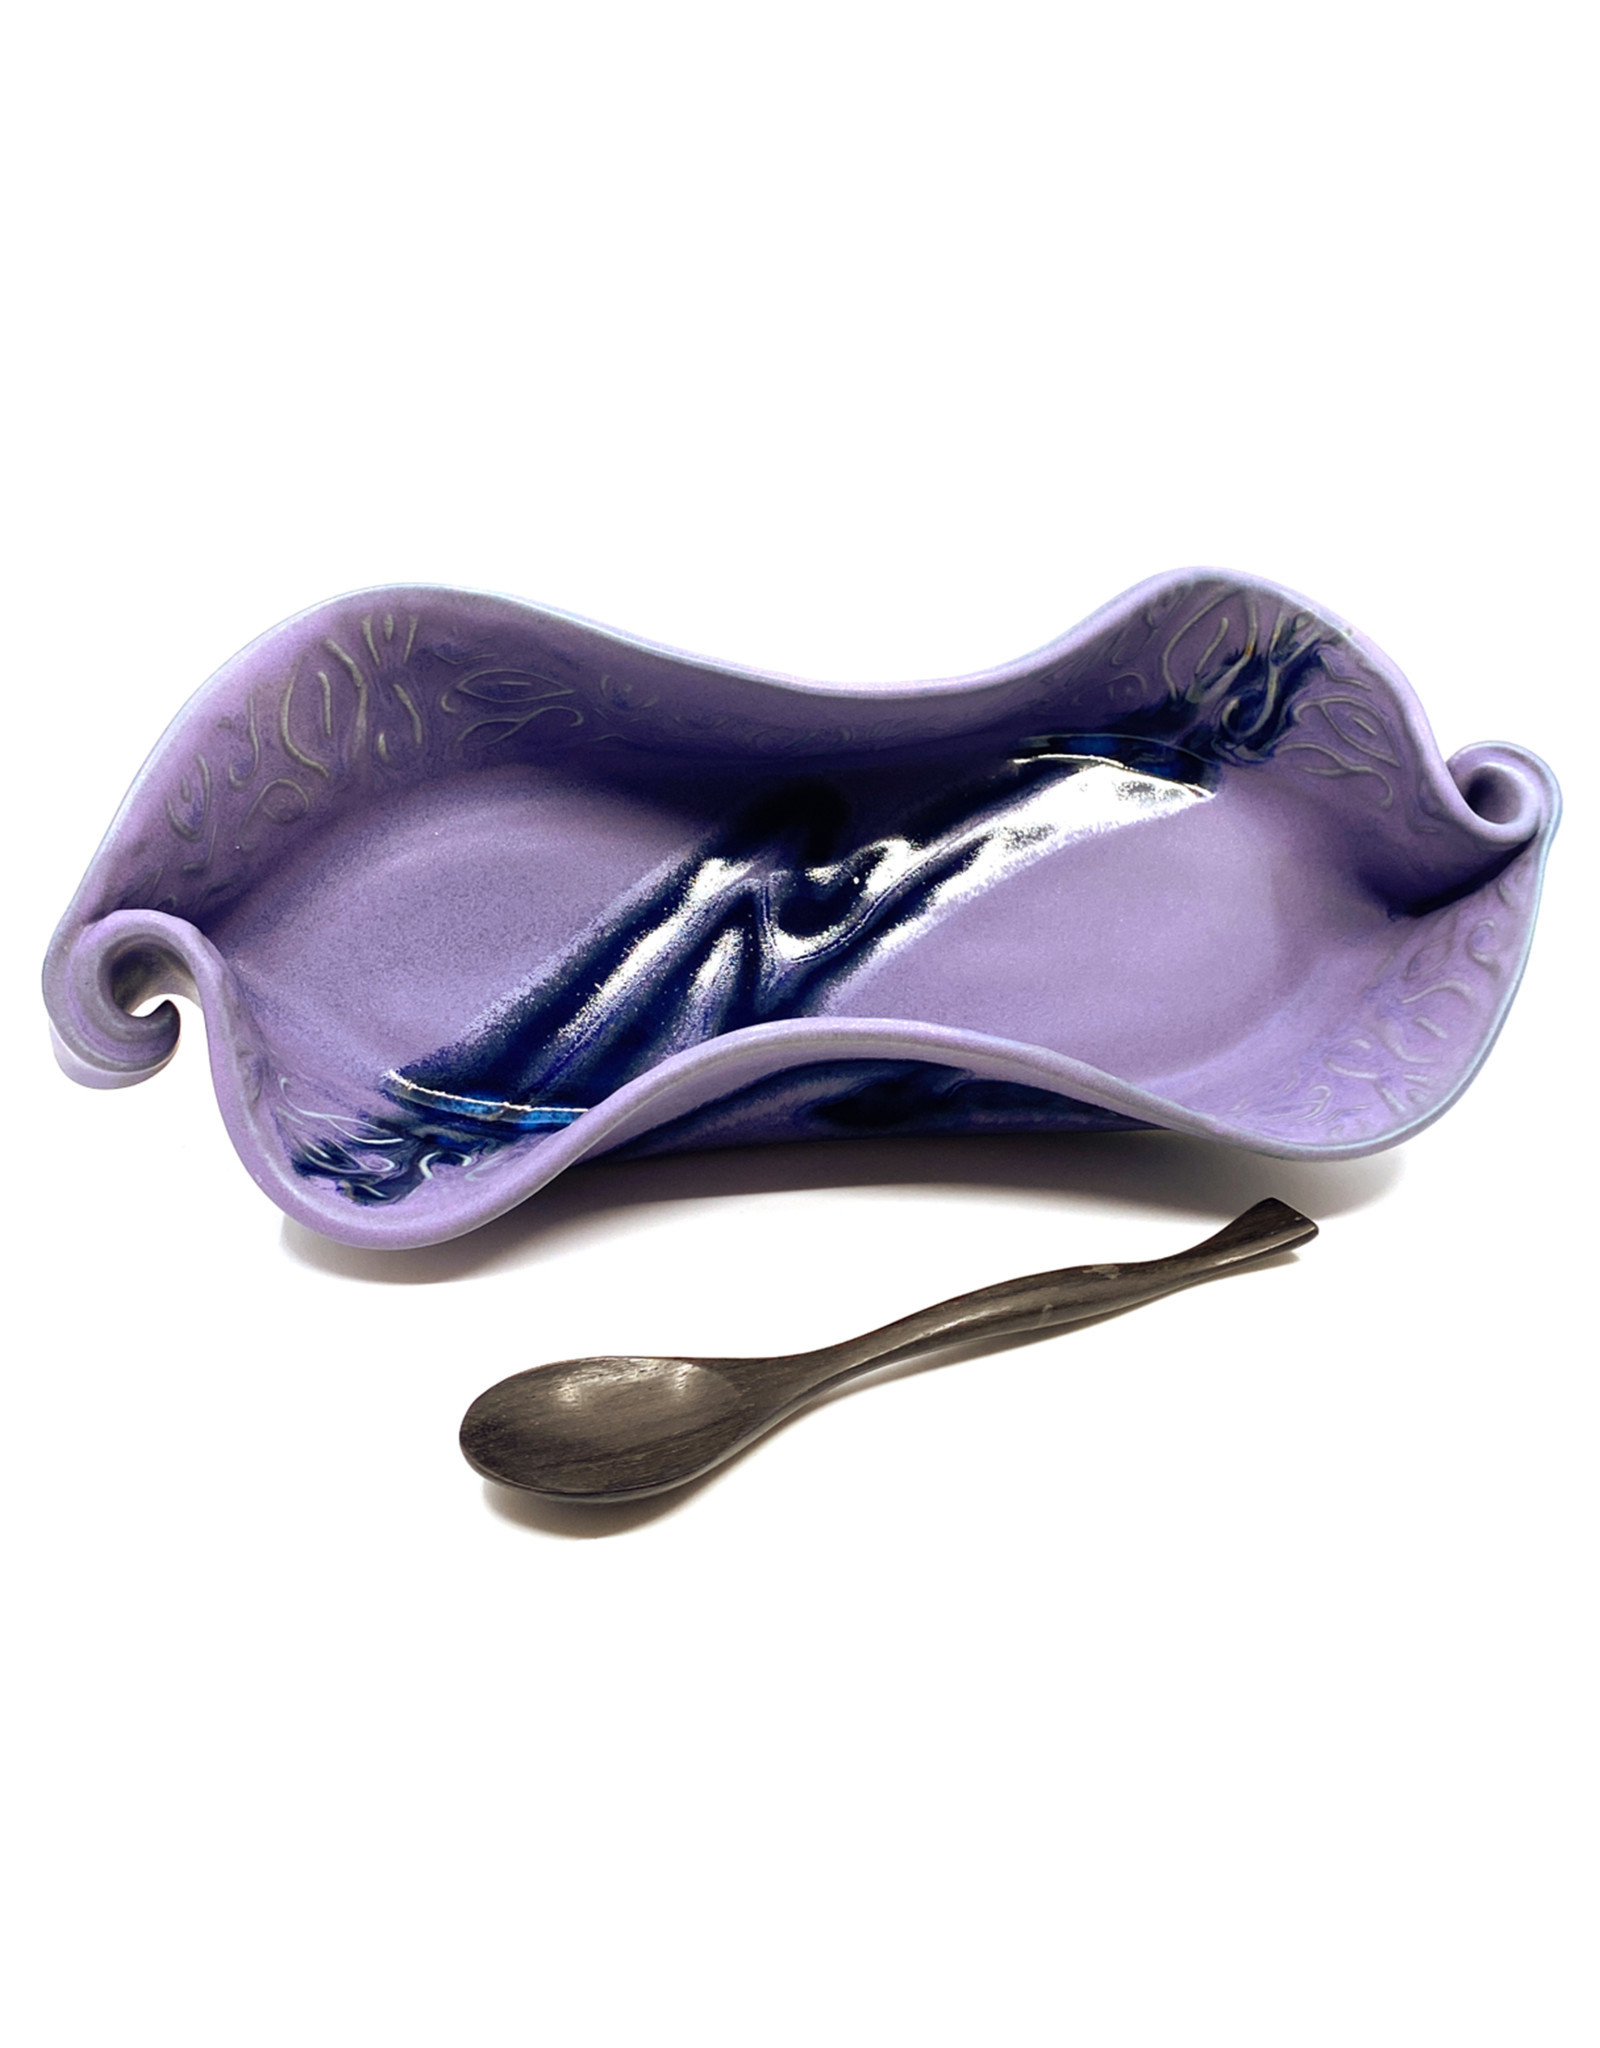 HILBORN POTTERY PERIWINKLE ASPARAGUS DISH WITH SPOON